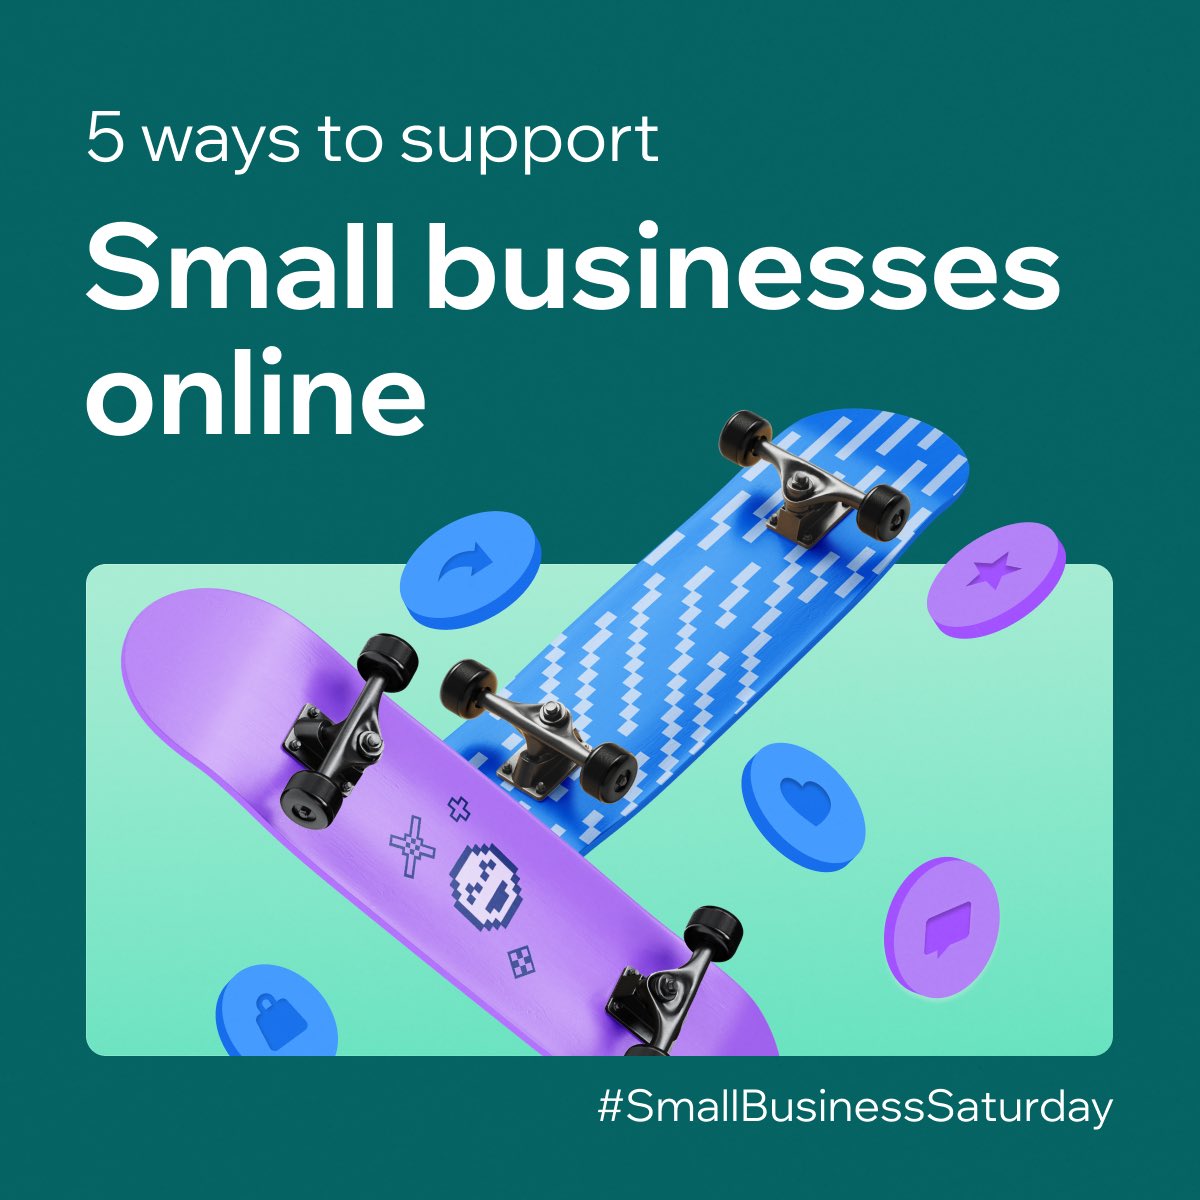 Text reads “5 ways to support small businesses online”. Illustration of skateboards and social media icons. Hashtag reads #SmallBusinessSaturday.